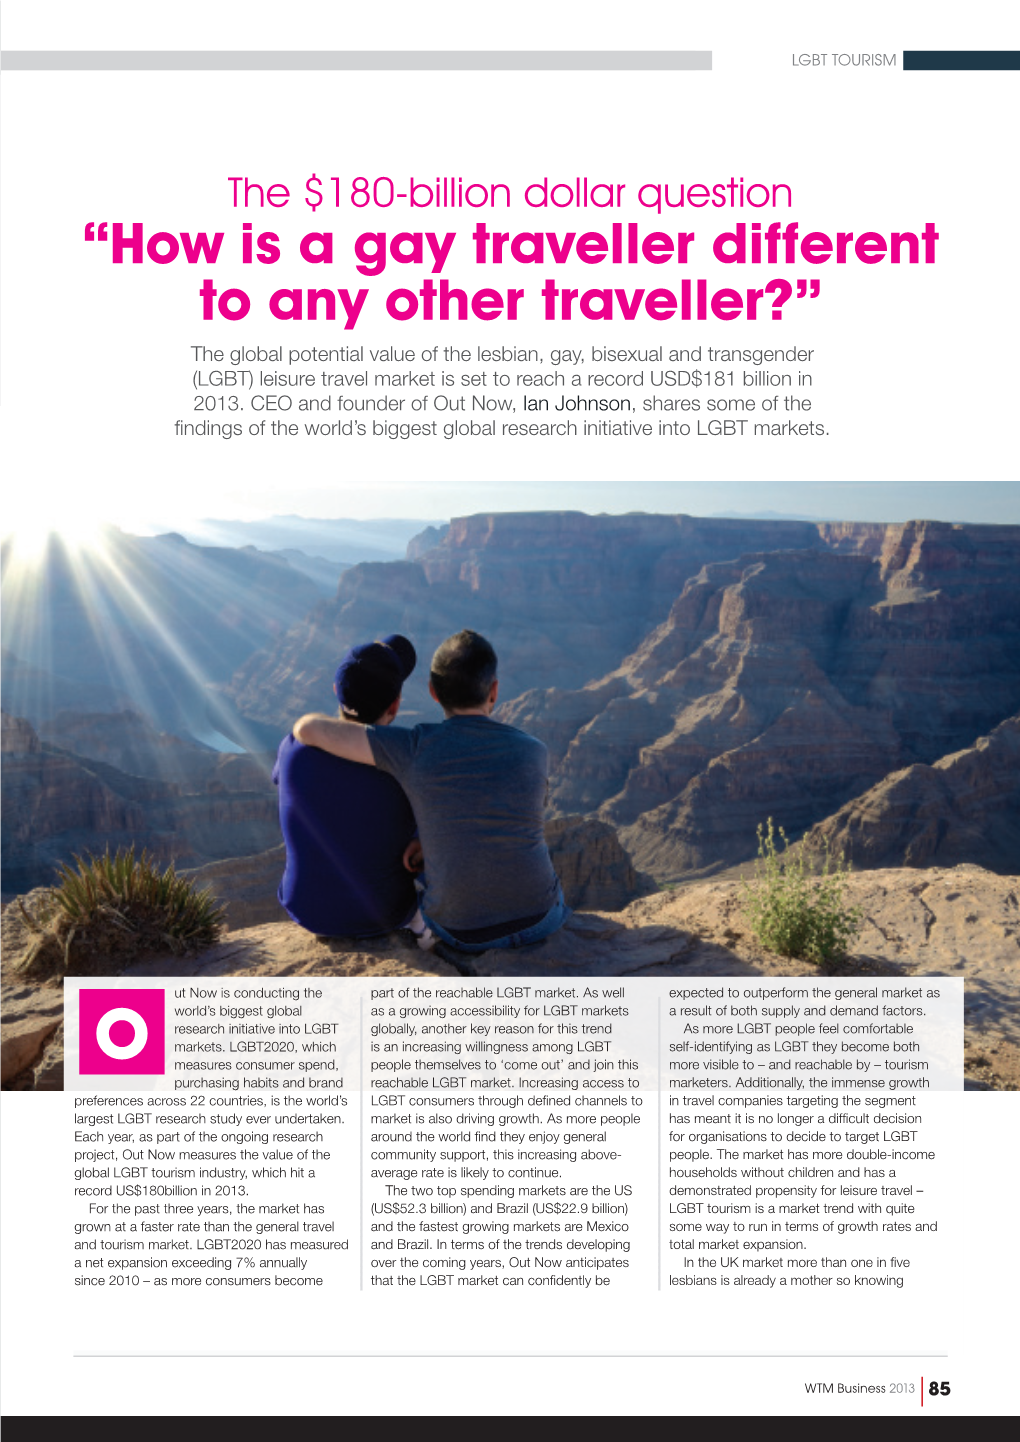 “How Is a Gay Traveller Different to Any Other Traveller?”